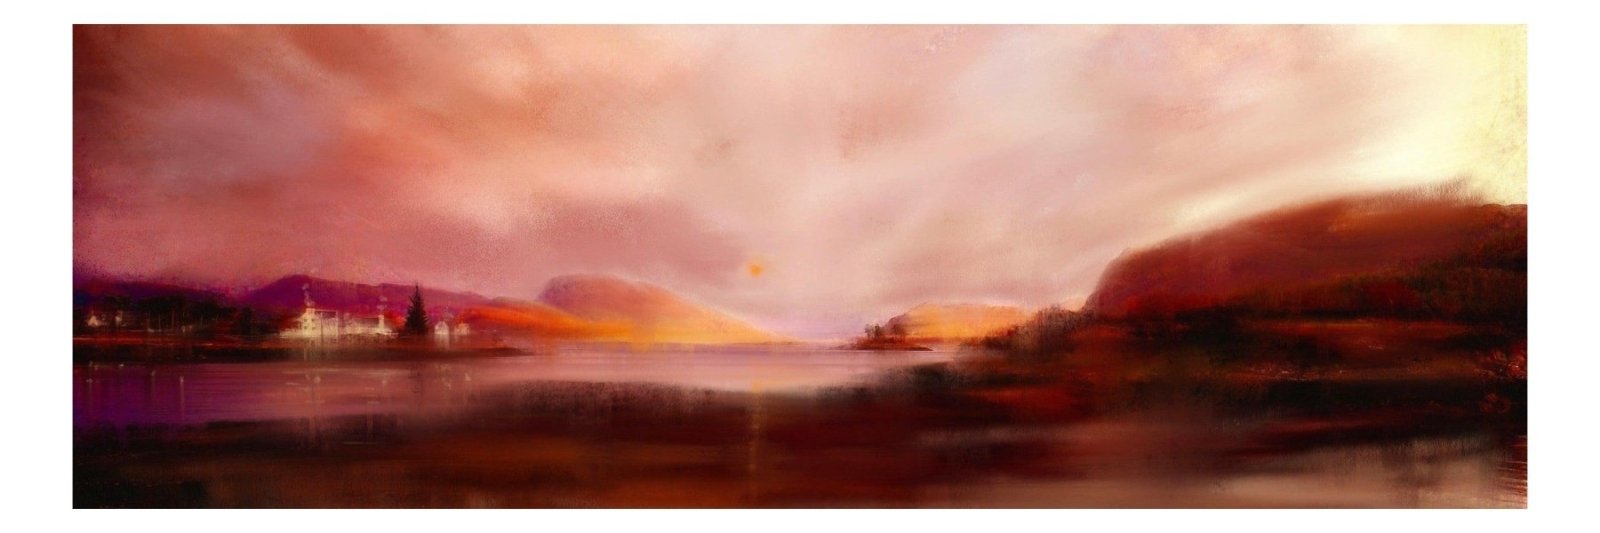 Plockton Sunset-Panoramic Prints-Scottish Highlands & Lowlands Art Gallery-Paintings, Prints, Homeware, Art Gifts From Scotland By Scottish Artist Kevin Hunter